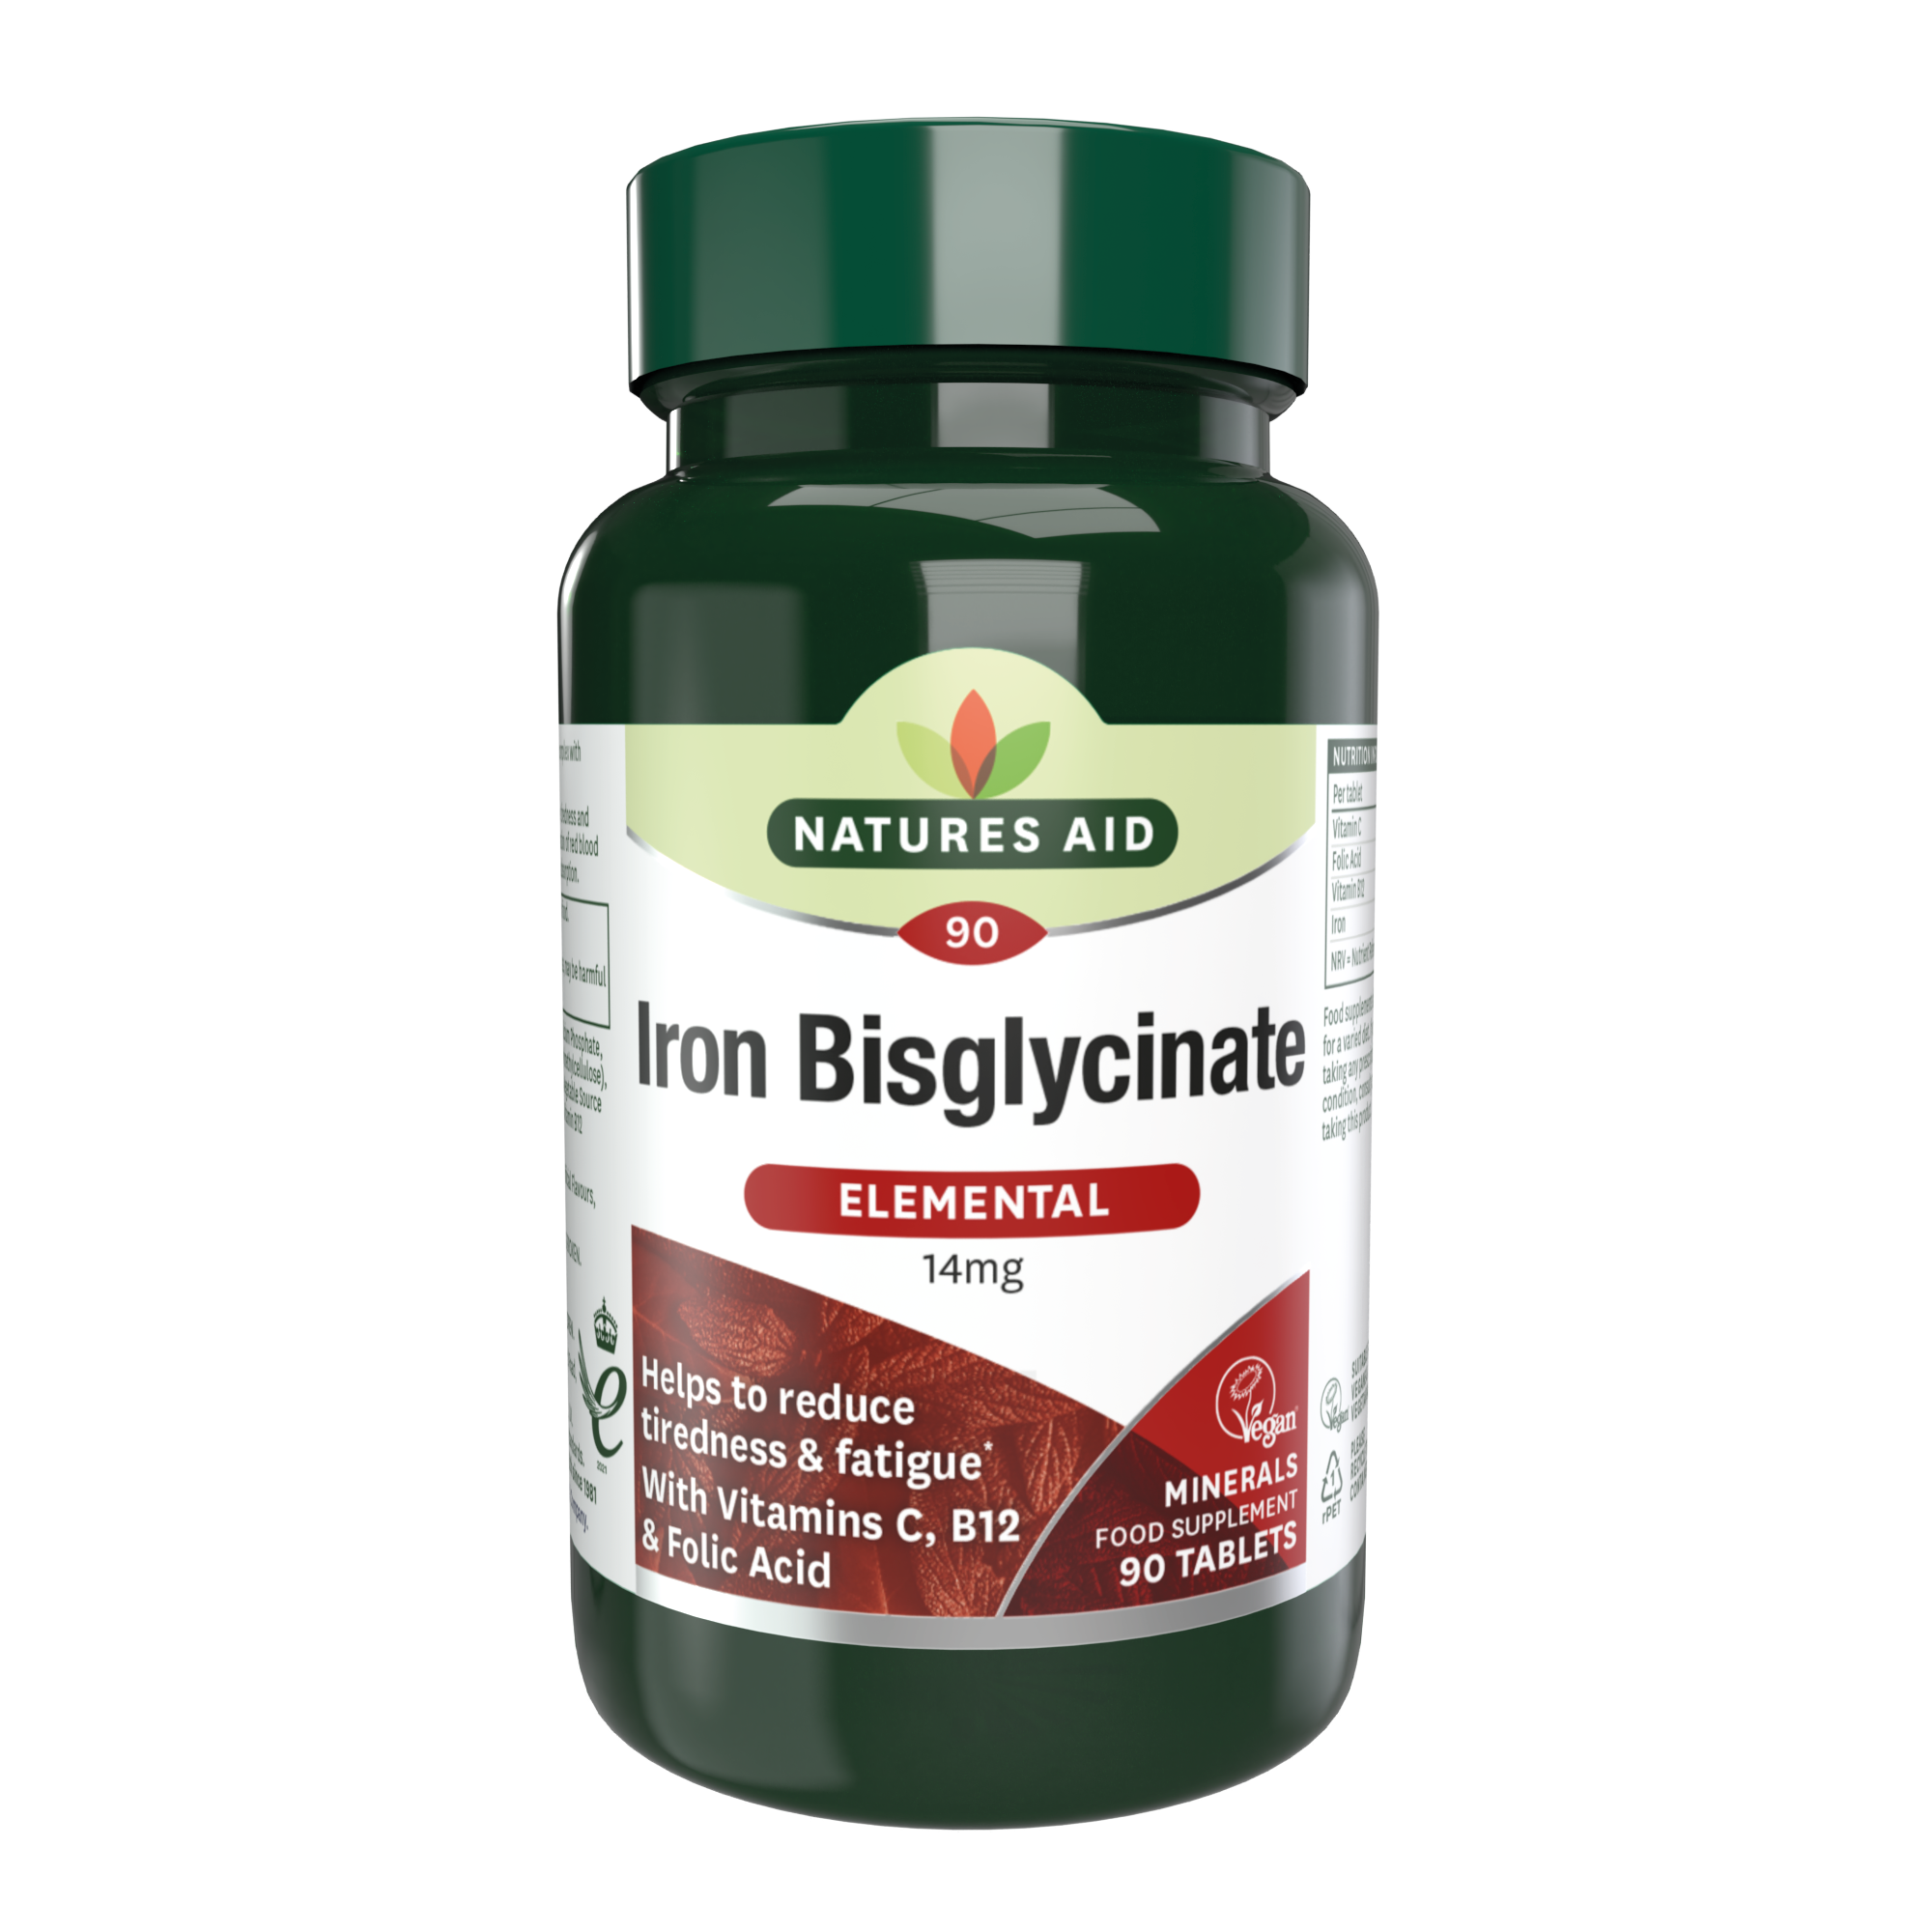 Natures Aid Iron Bisglycinate 14mg Elemental (90)